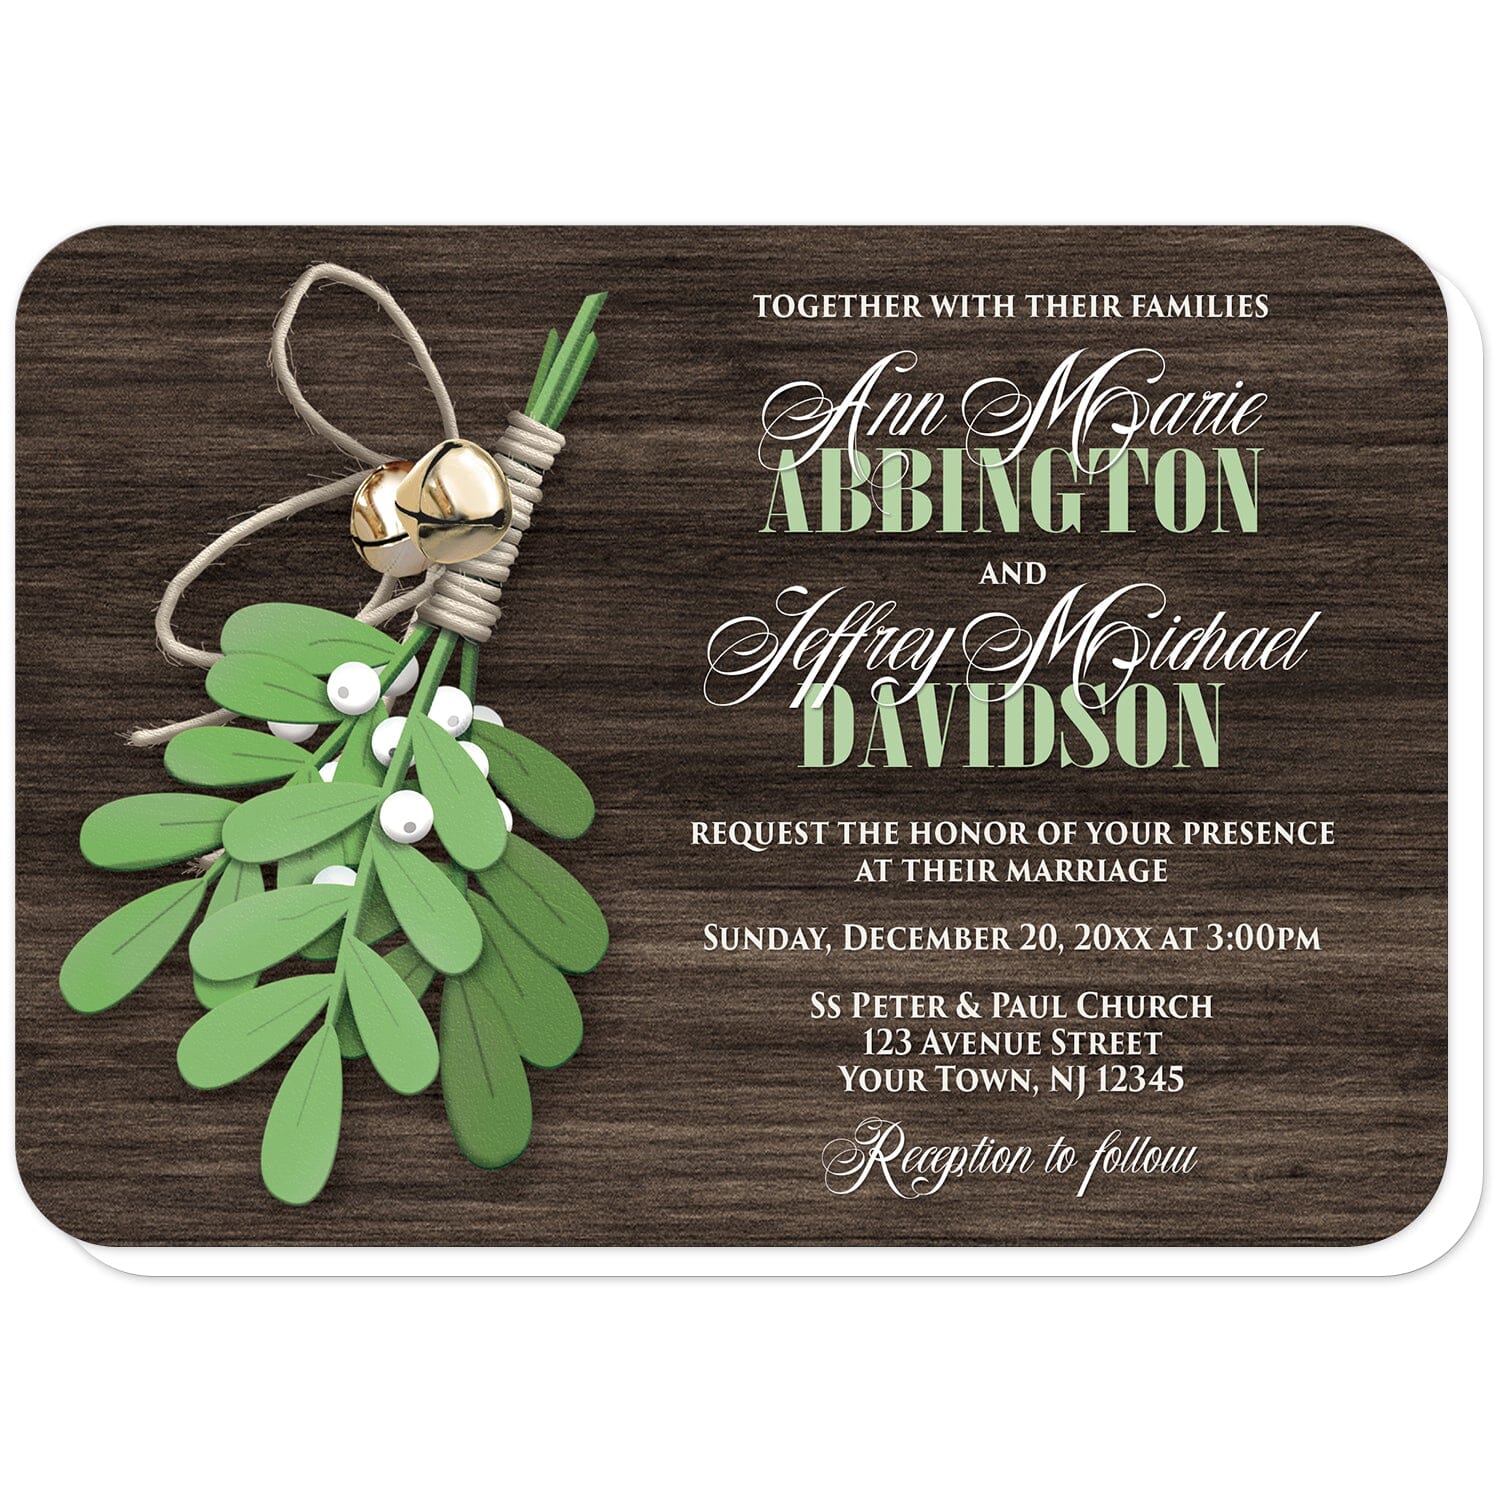 Rustic Mistletoe and Wood Wedding Invitations (with rounded corners) at Artistically Invited. Country-inspired rustic mistletoe and wood wedding invitations with an illustrated mistletoe plant tied together with twine and jingle bells over a dark brown wood background. Your personalized marriage celebration details are custom printed in white and green over the wood design to the right of the mistletoe. 